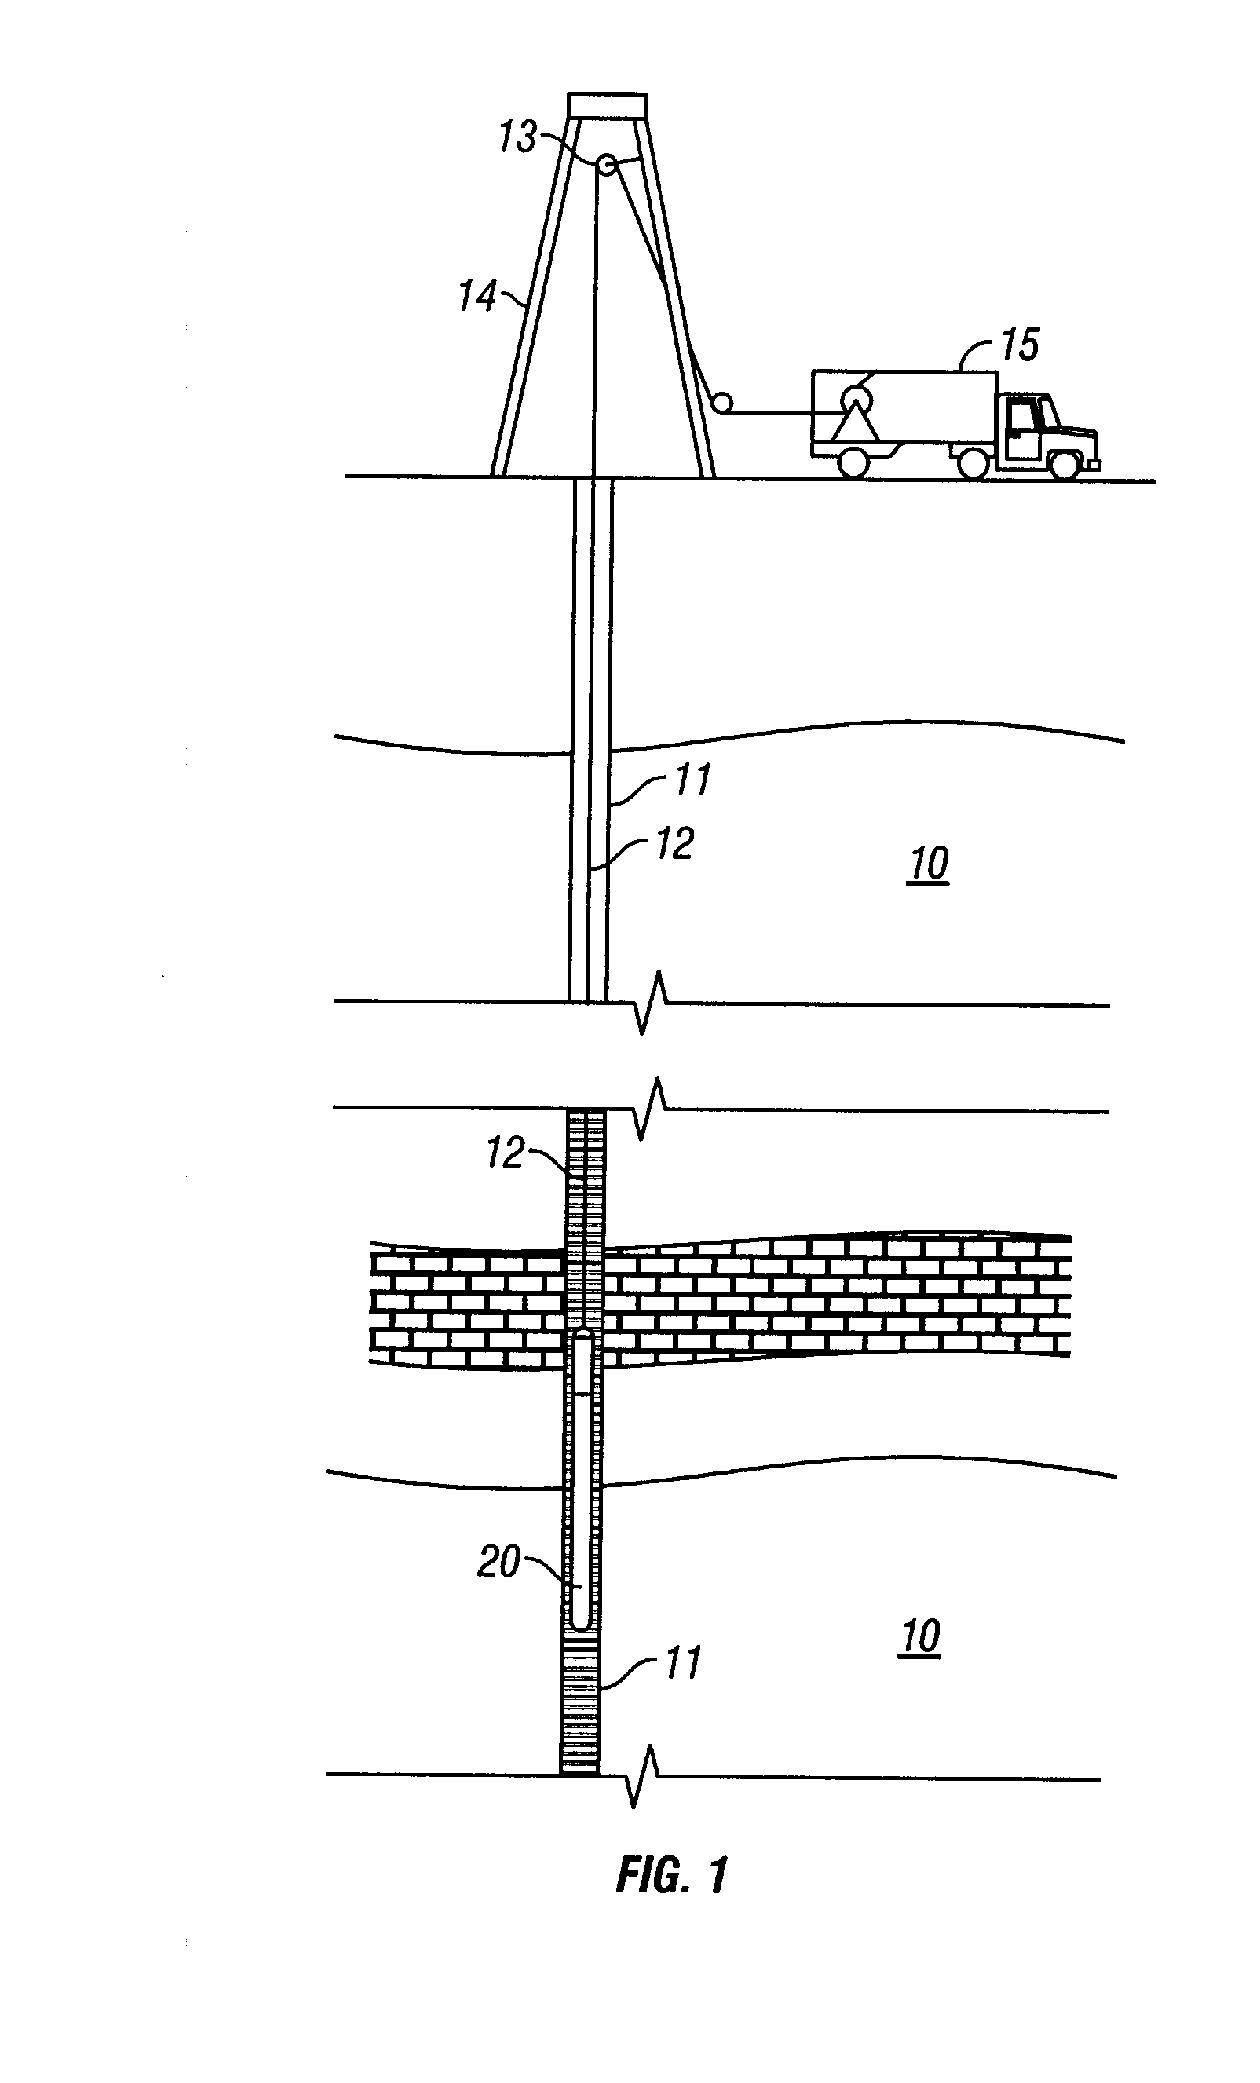 Method and apparatus for determining an optimal pumping rate based on a downhole dew point pressure determination